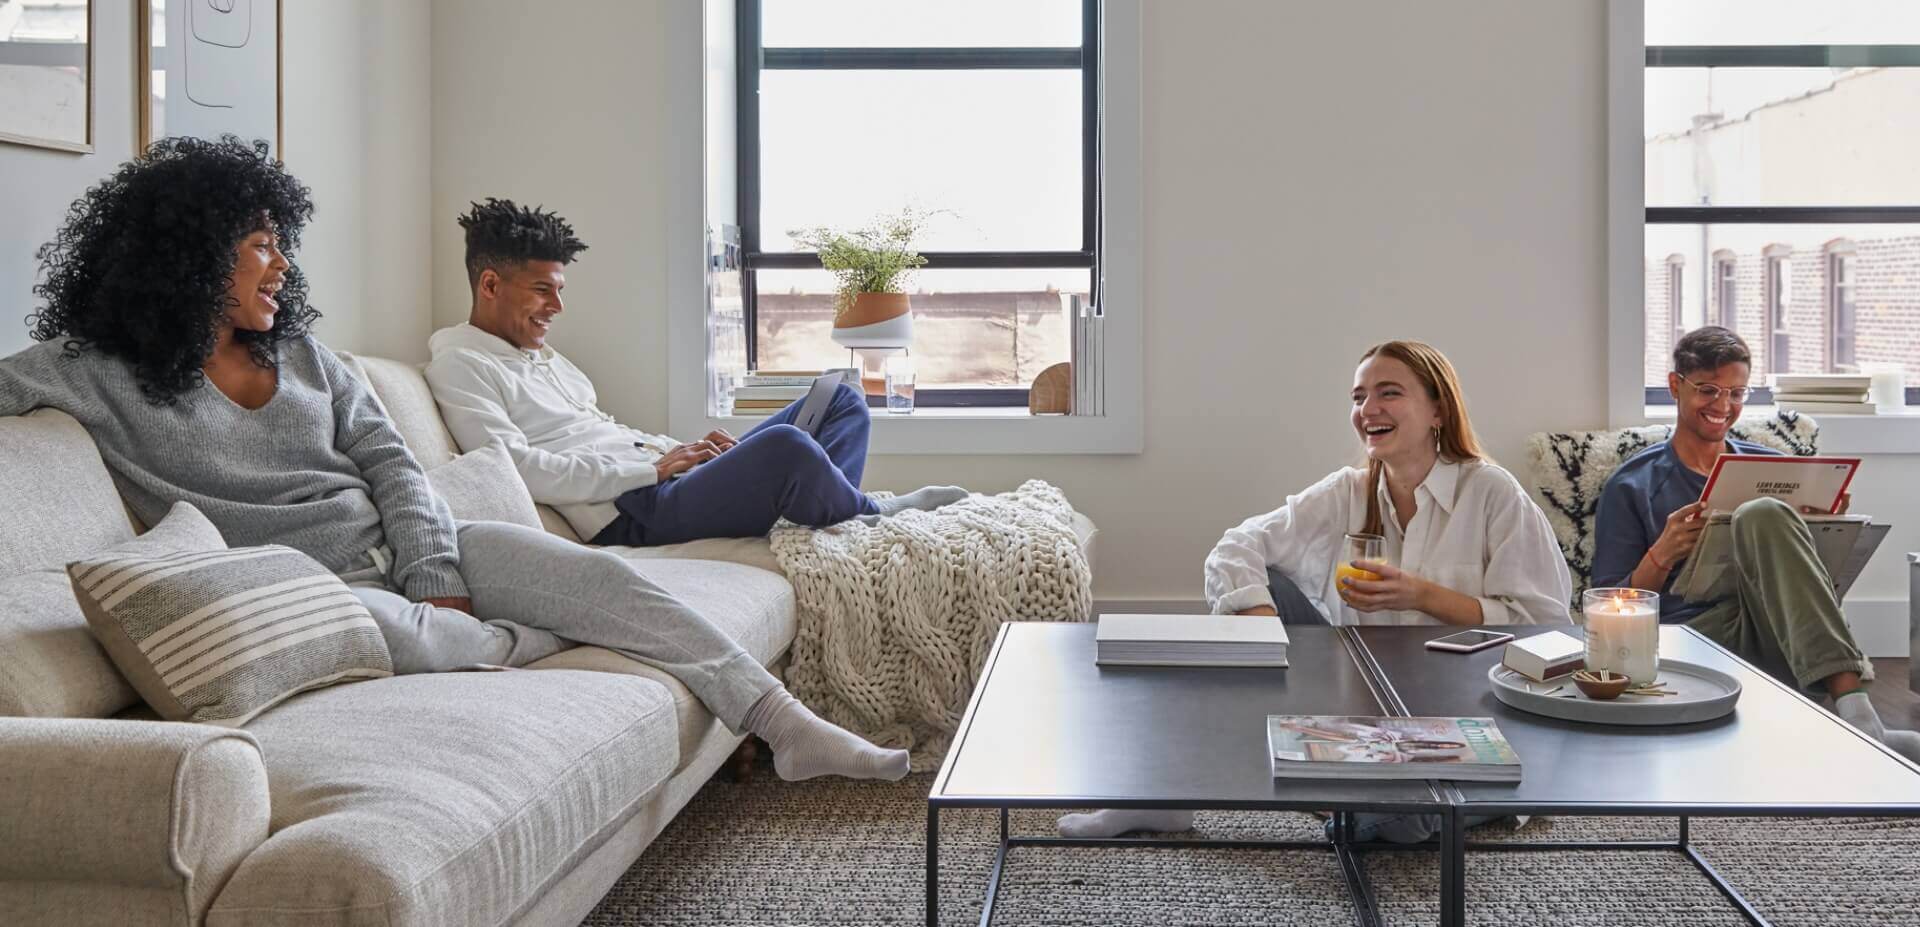 Coliving in the USA. How new habits are changing the real estate market